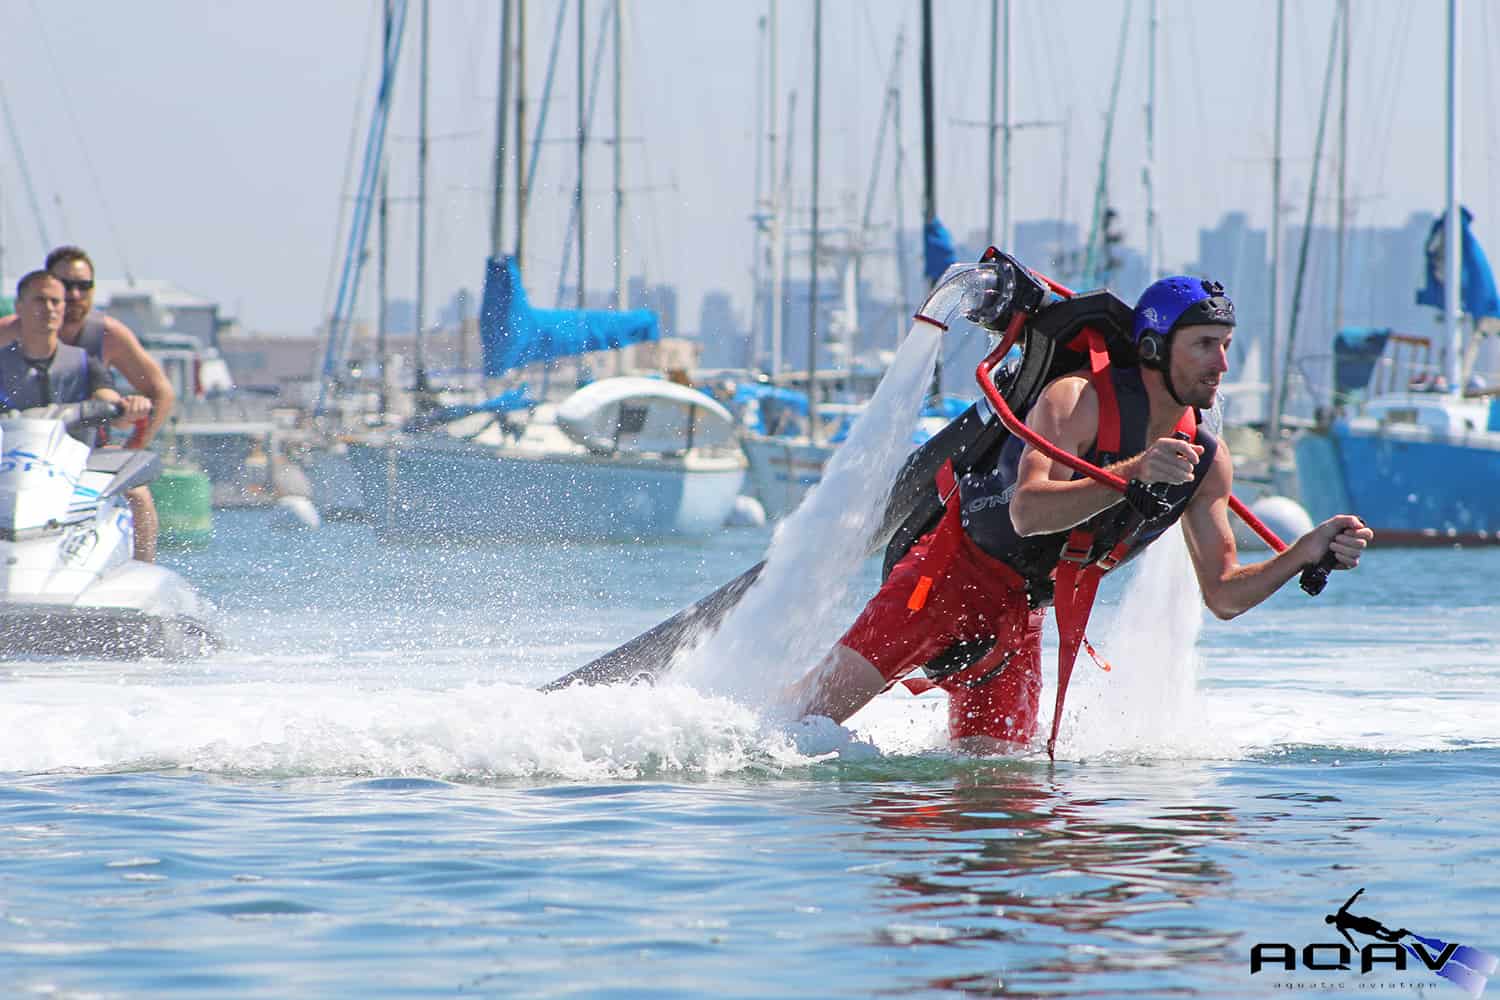 Aquatic Aviation's Water Jetpack is now available in San Diego ...